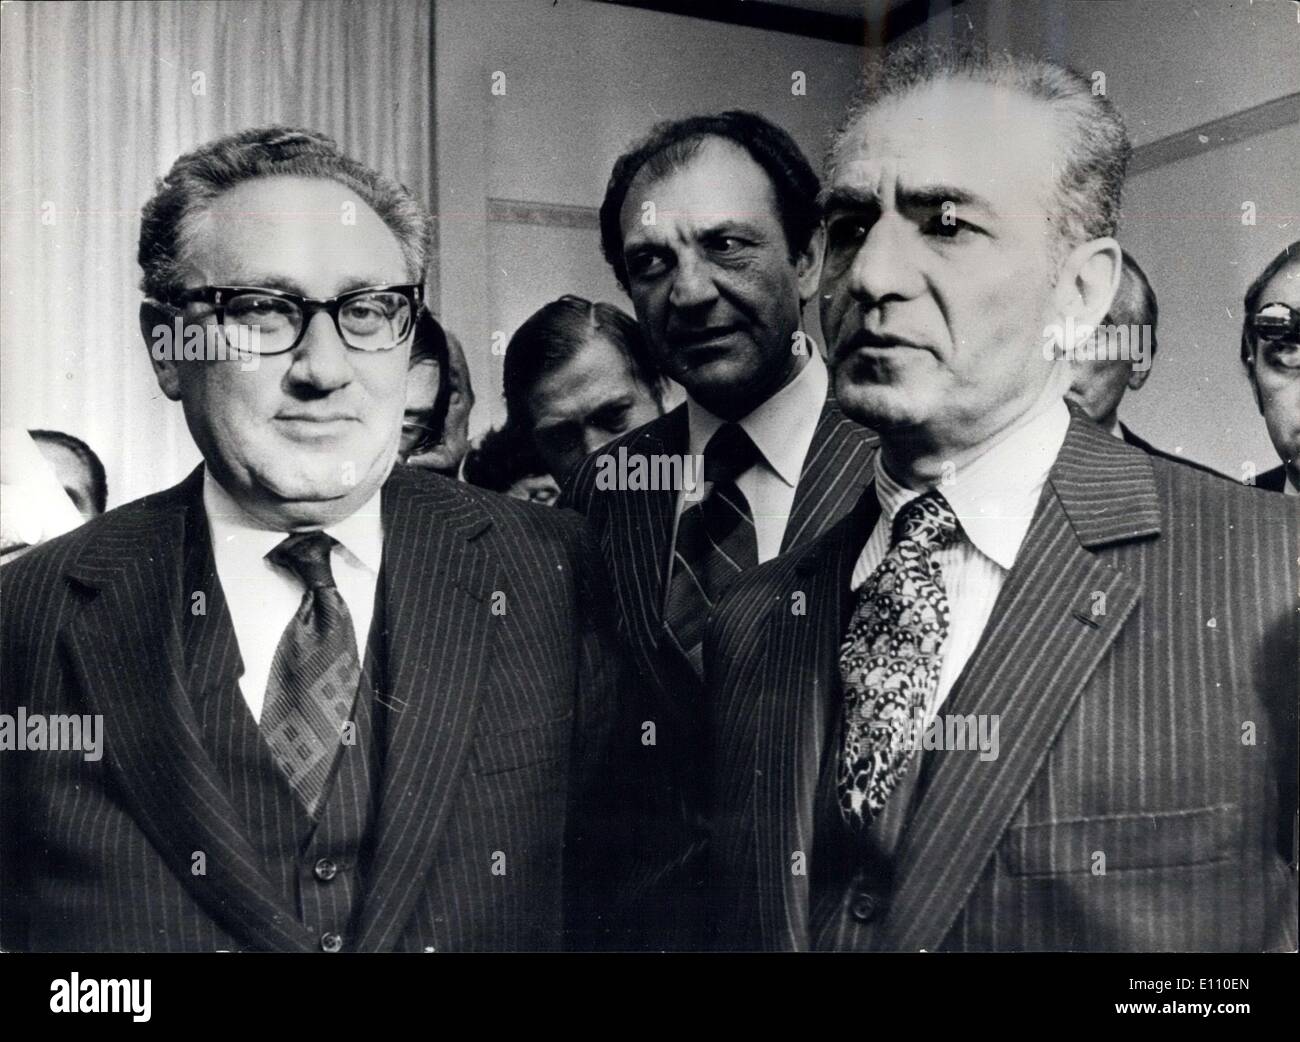 Feb. 19, 1975 - Dr. Kissinger Meets The Shah of Iran, In Zurich. Photo Shows:- Dr. Henry Kissinger (left), the U.S. Secretary of State, pictured with the Shah of Iran after they had lunched at a Zurich hotel, yesyerday. Stock Photo